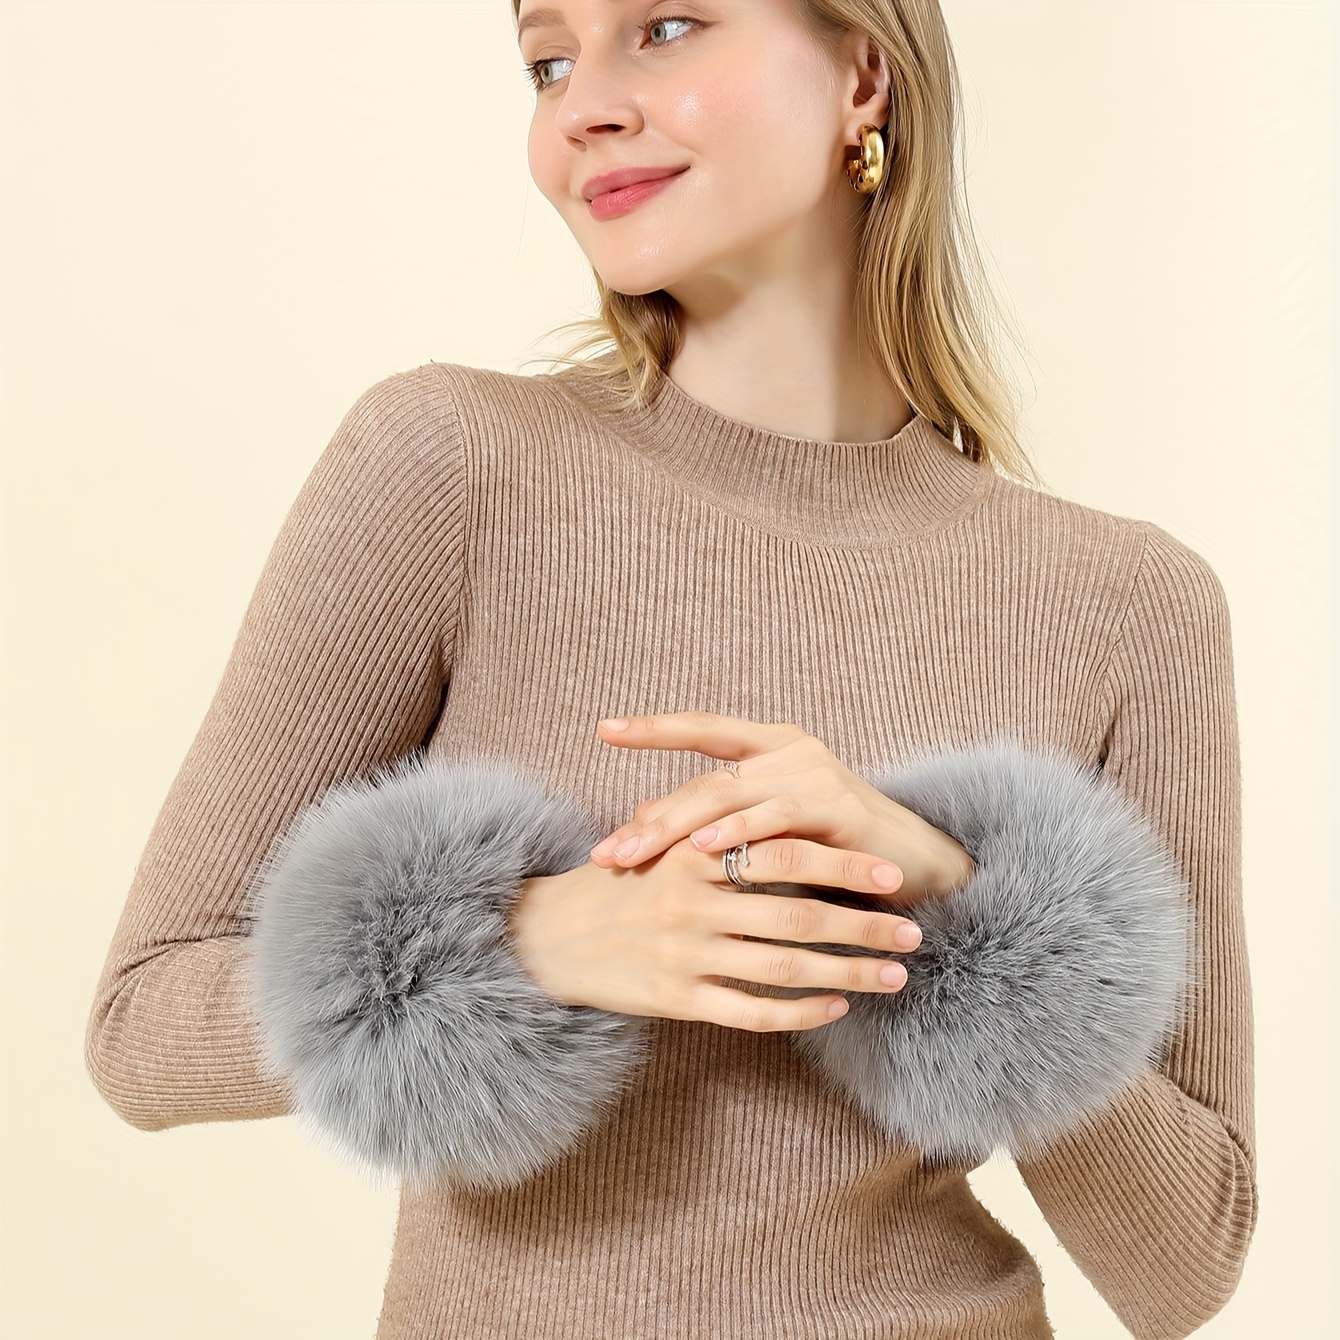 Stylish Faux Fur Sleeves Ladies Solid Color Soft Cozy Fluffy Wrist Cover  Autumn Winter Short Warm Decoration Circular Sleeve Cuff